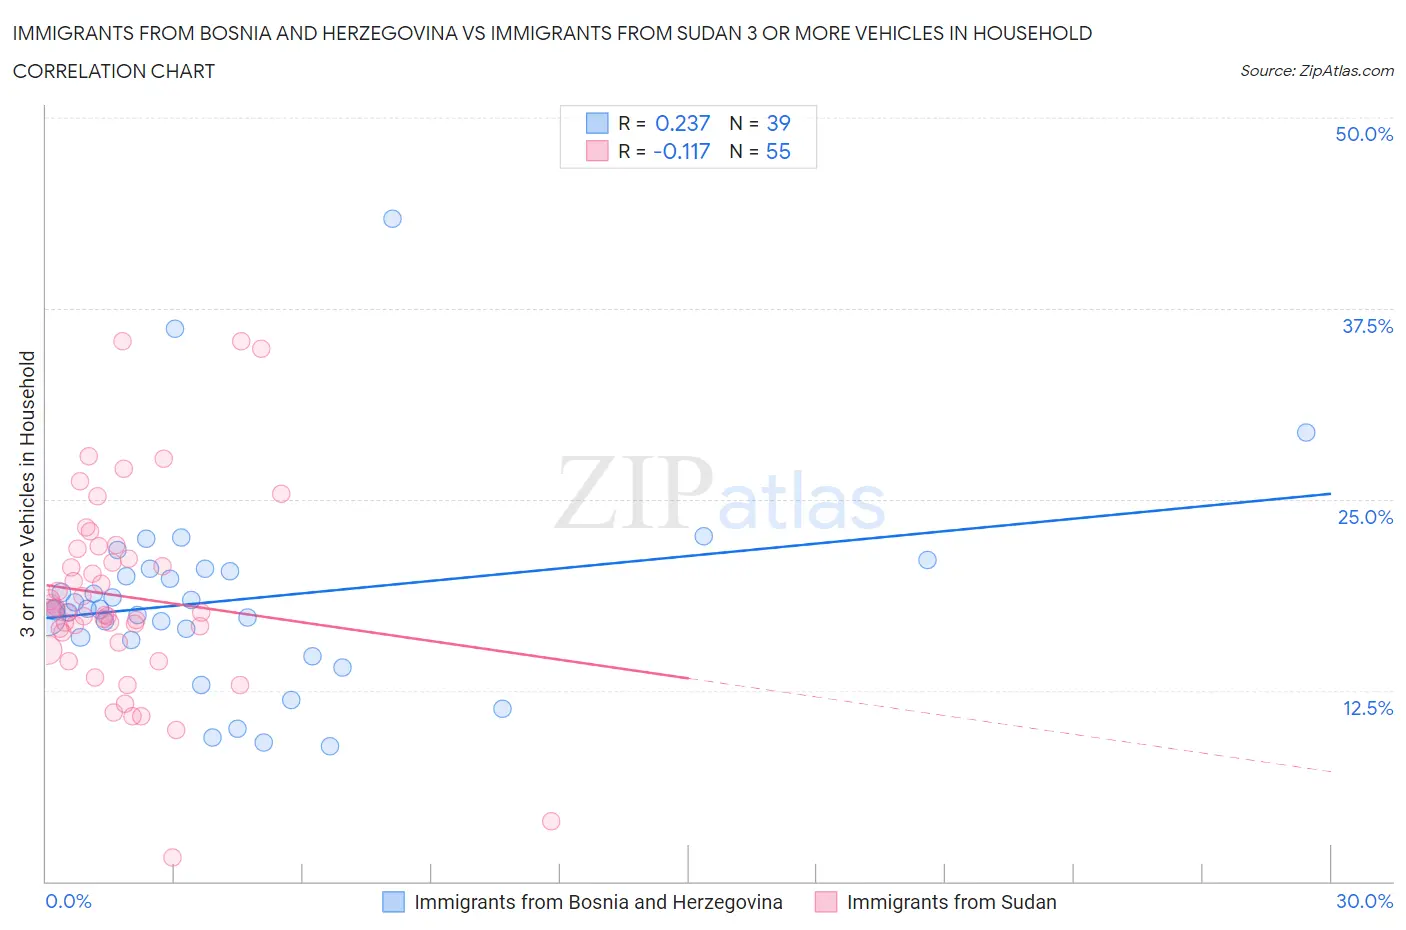 Immigrants from Bosnia and Herzegovina vs Immigrants from Sudan 3 or more Vehicles in Household